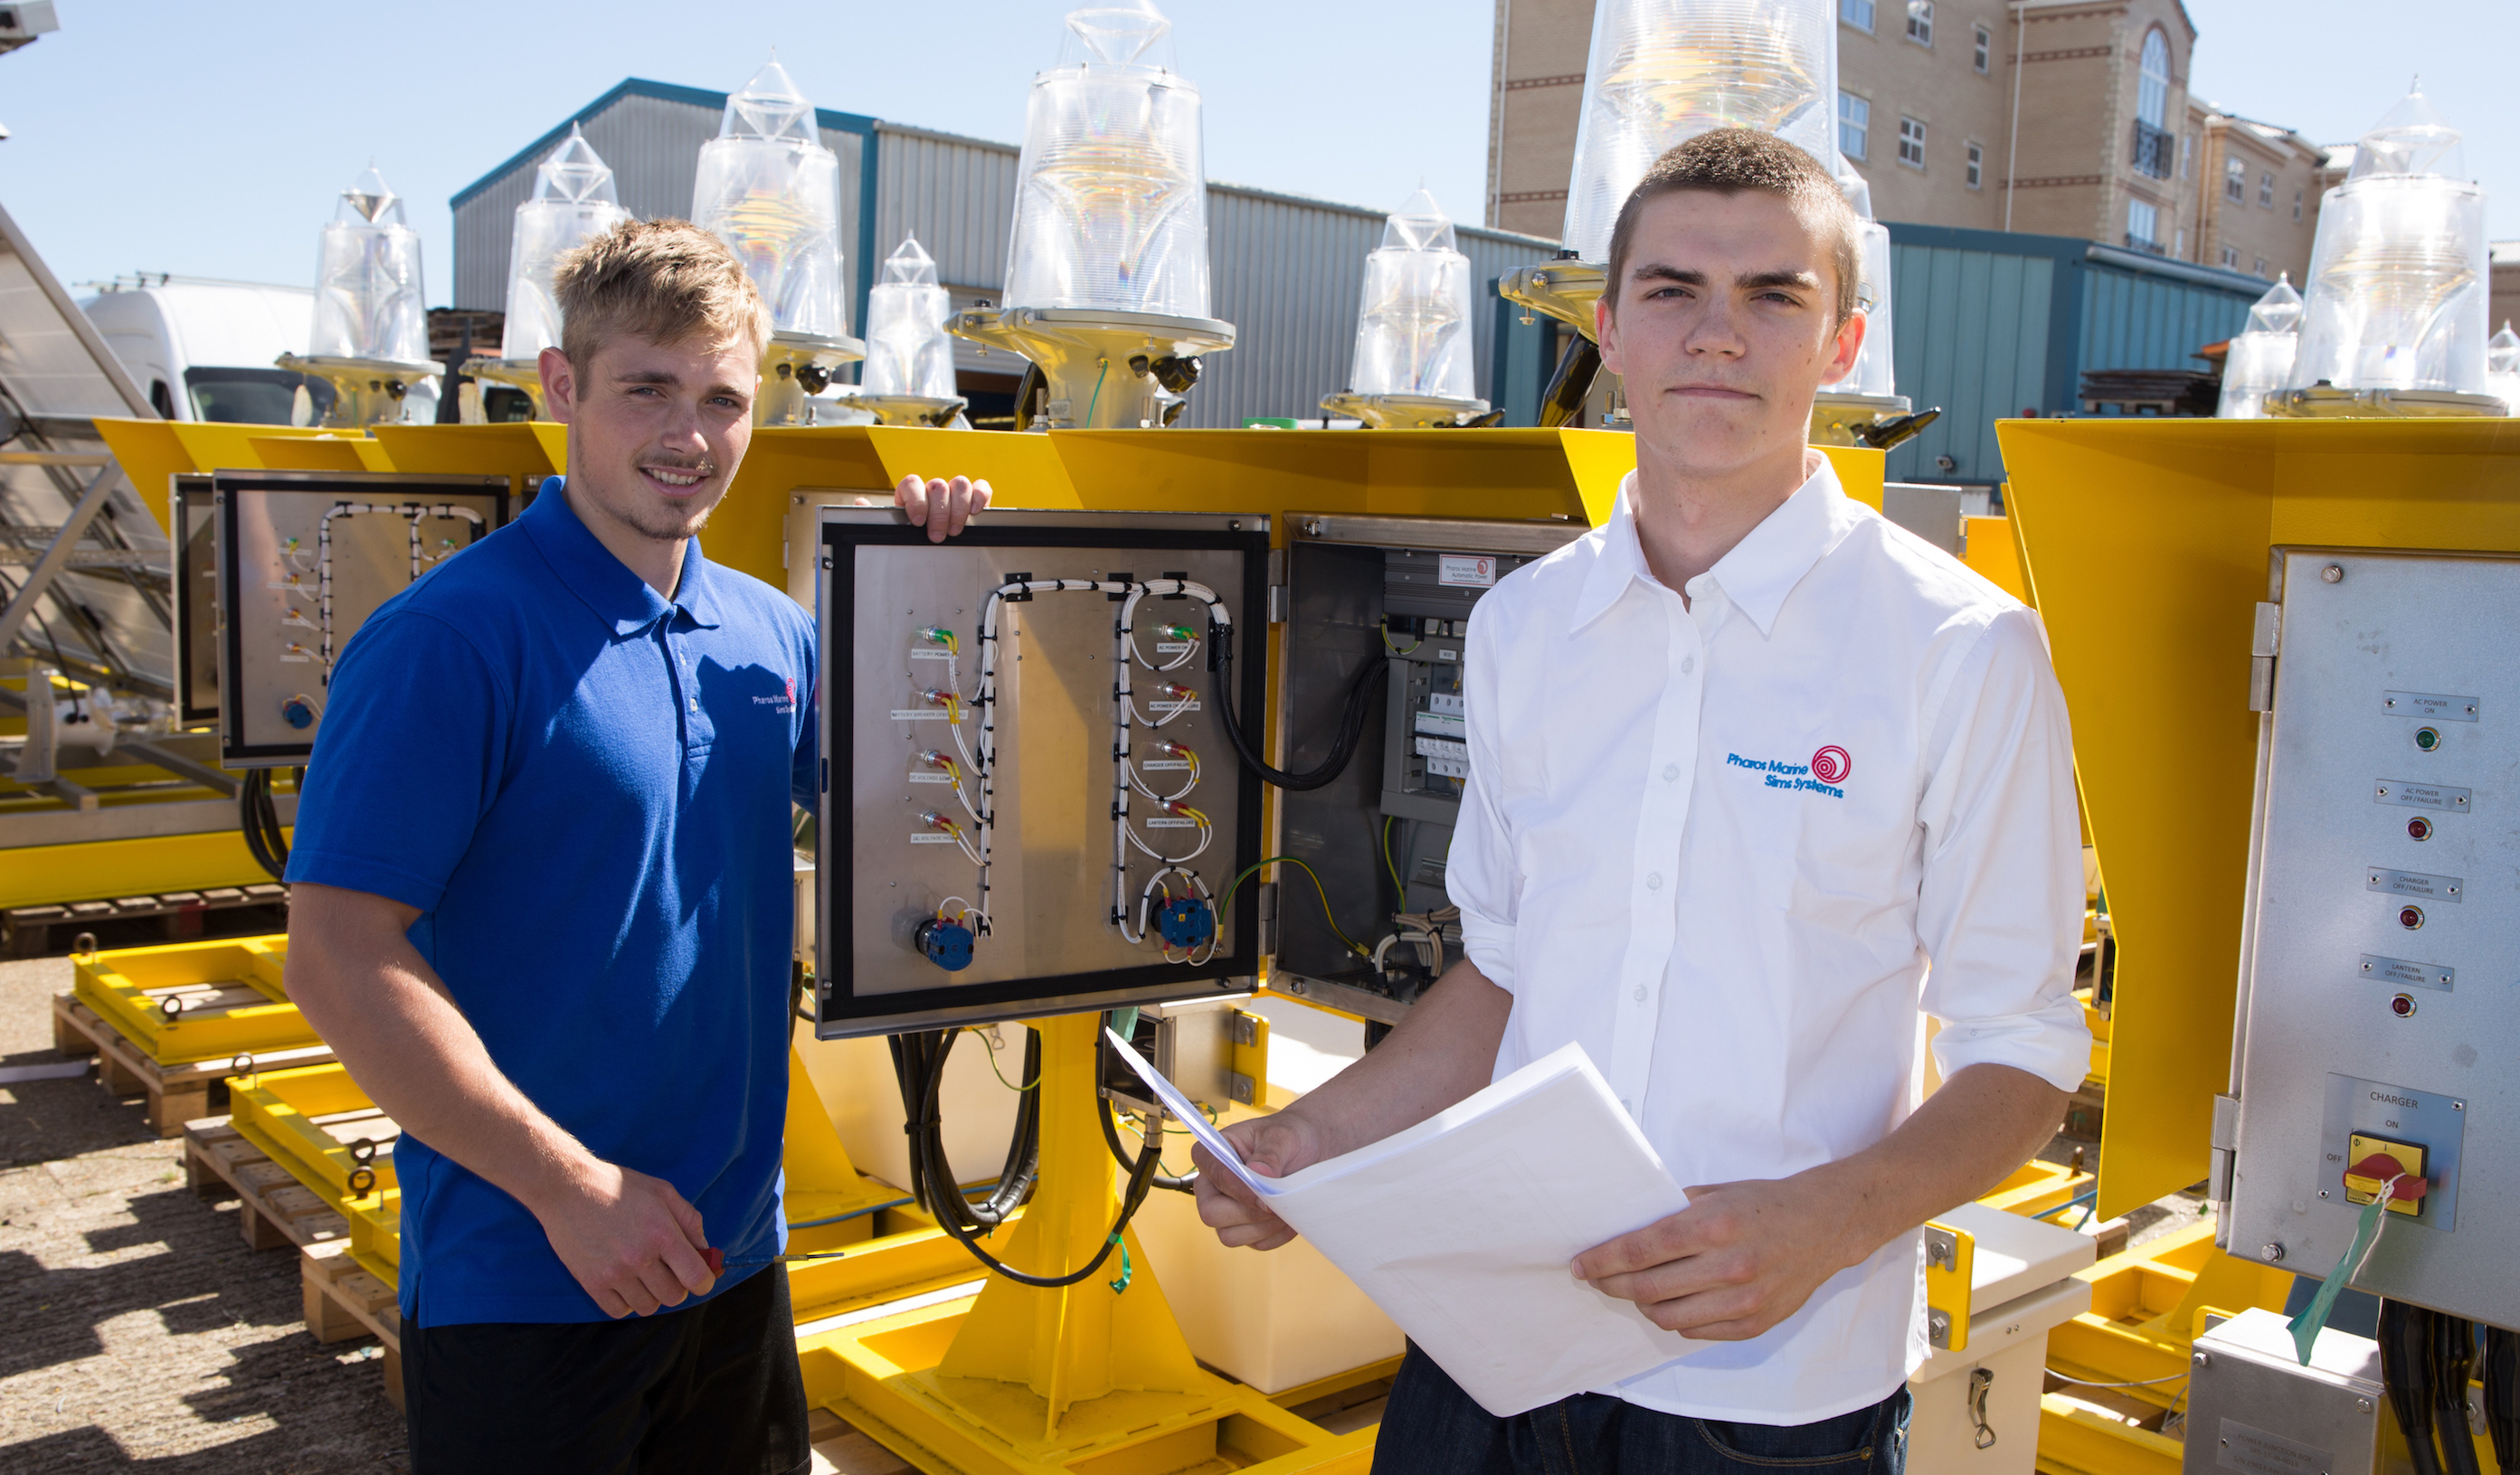 Apprentices Tom Woodruff (right) and Cory Newland, taken on by Pharos Marine Sims Systems to complete their apprenticeships after being made redundancy because of the oil & gas industry downturn